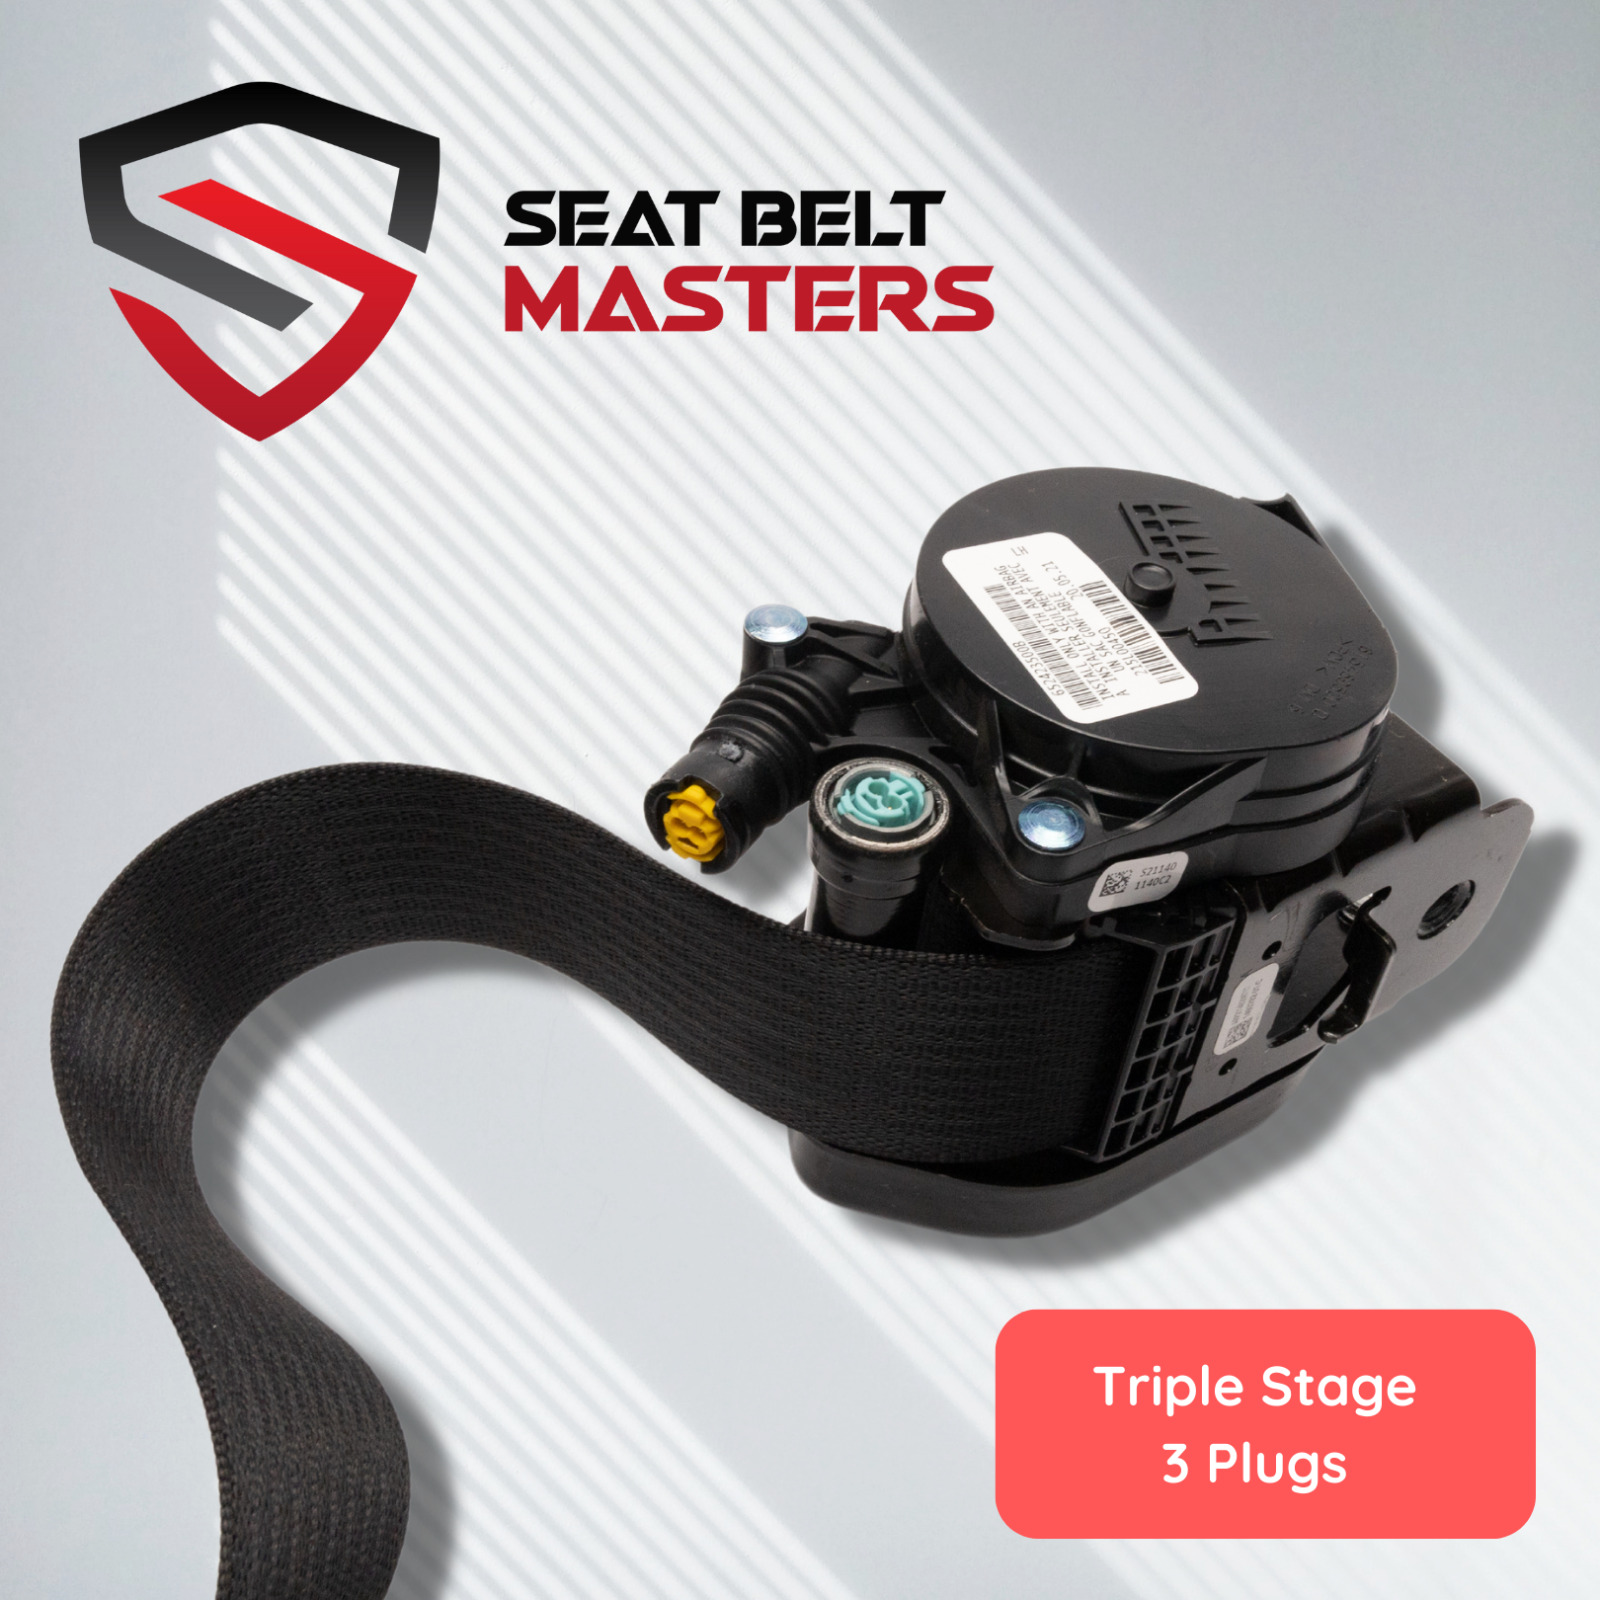 Triple-Stage Safety Belt Repair Service - All Makes and Models - 24hrs